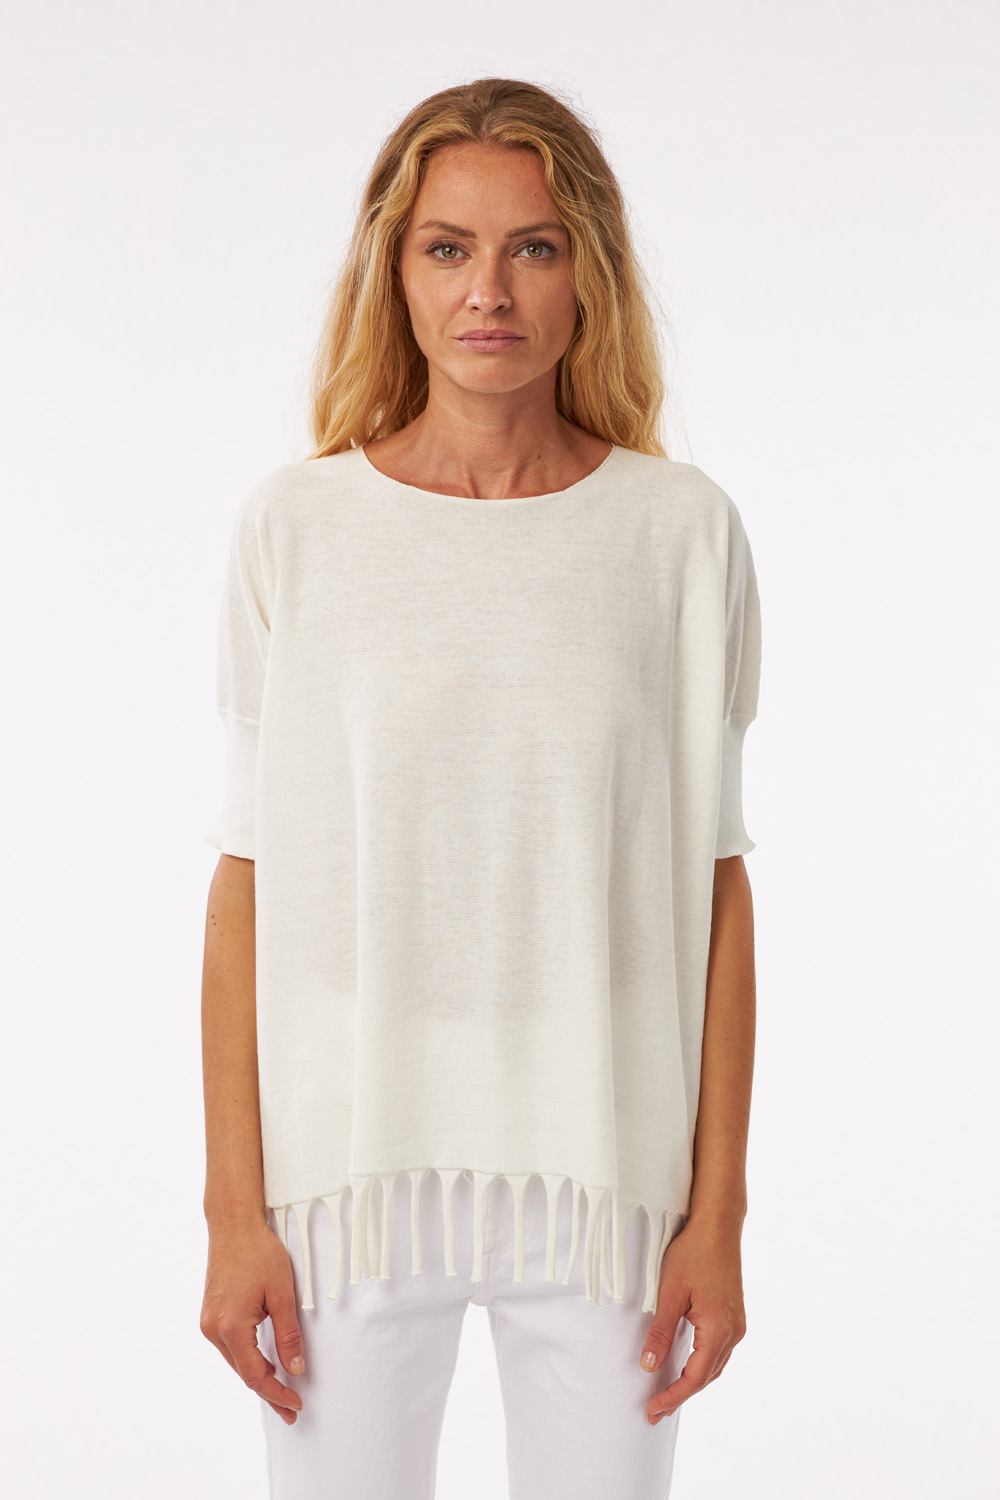 boat neck sweater with fringes at bottom